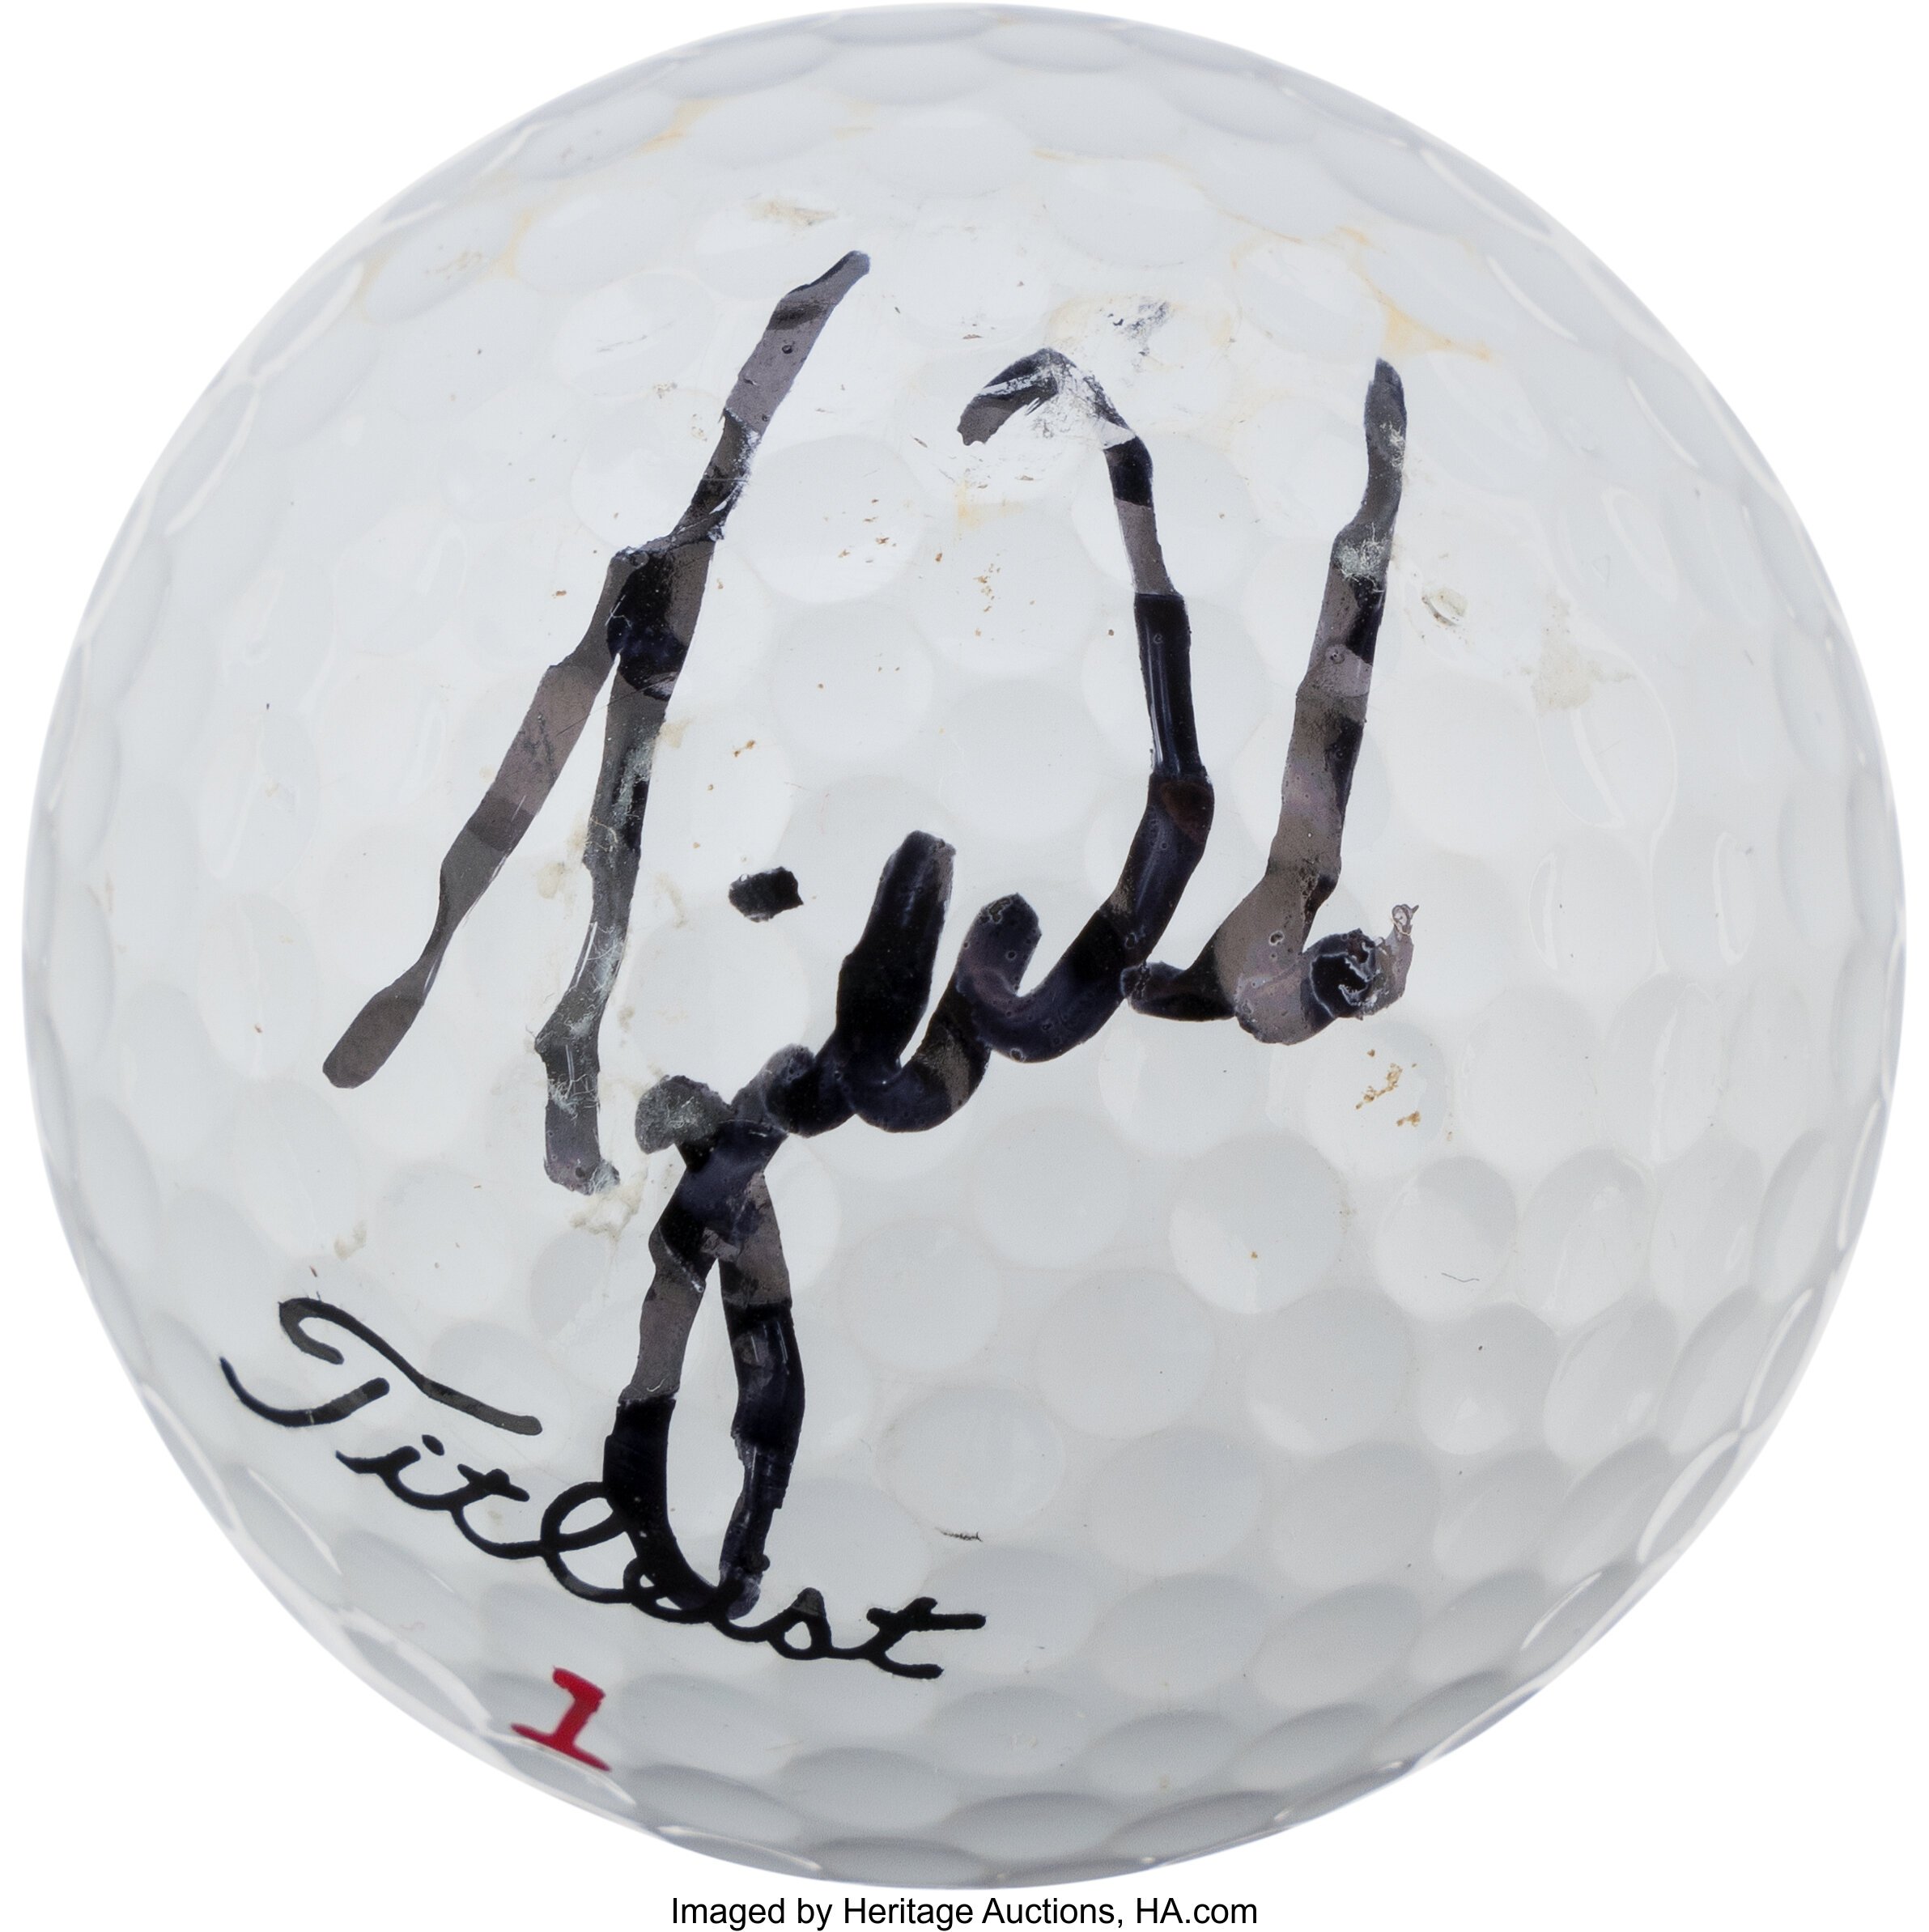 Tiger Woods first hole-in-one ball